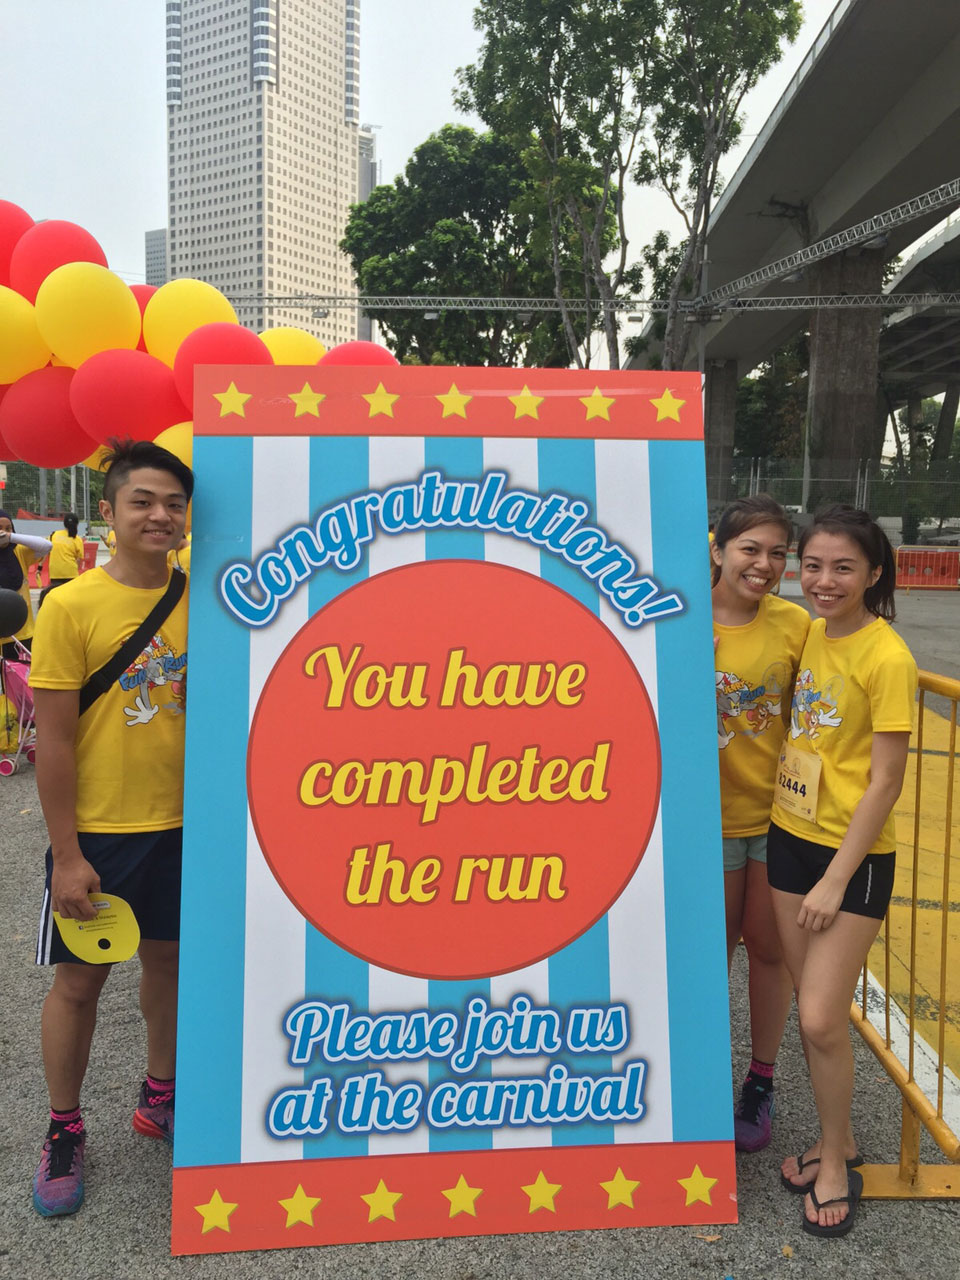 Tom and Jerry Fun Run Singapore Aftermath: A Great Family Affair